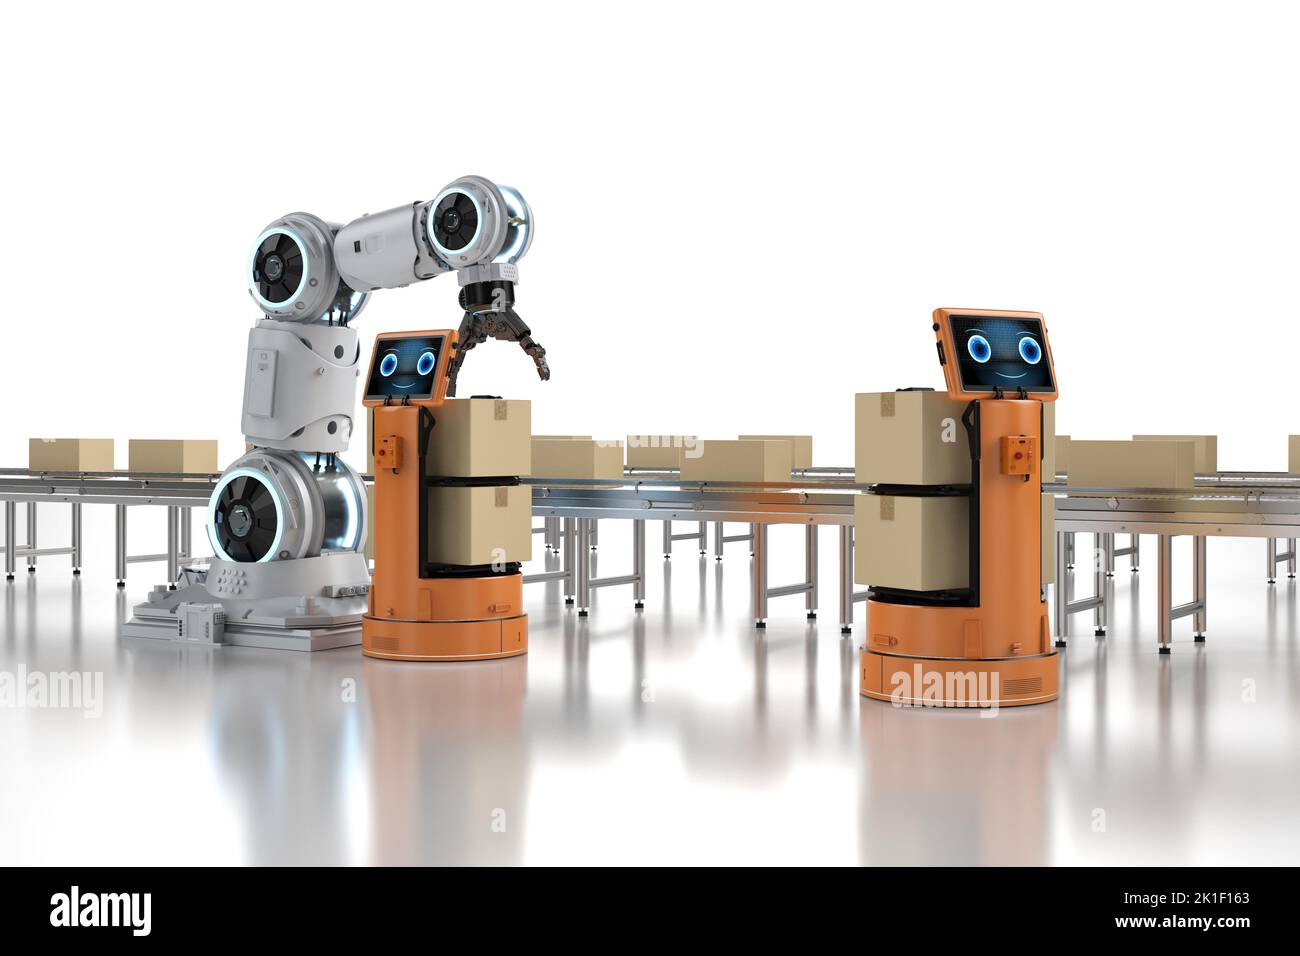 Automation factory concept with 3d rendering robot arm with warehouse robot and conveyor belt Stock Photo